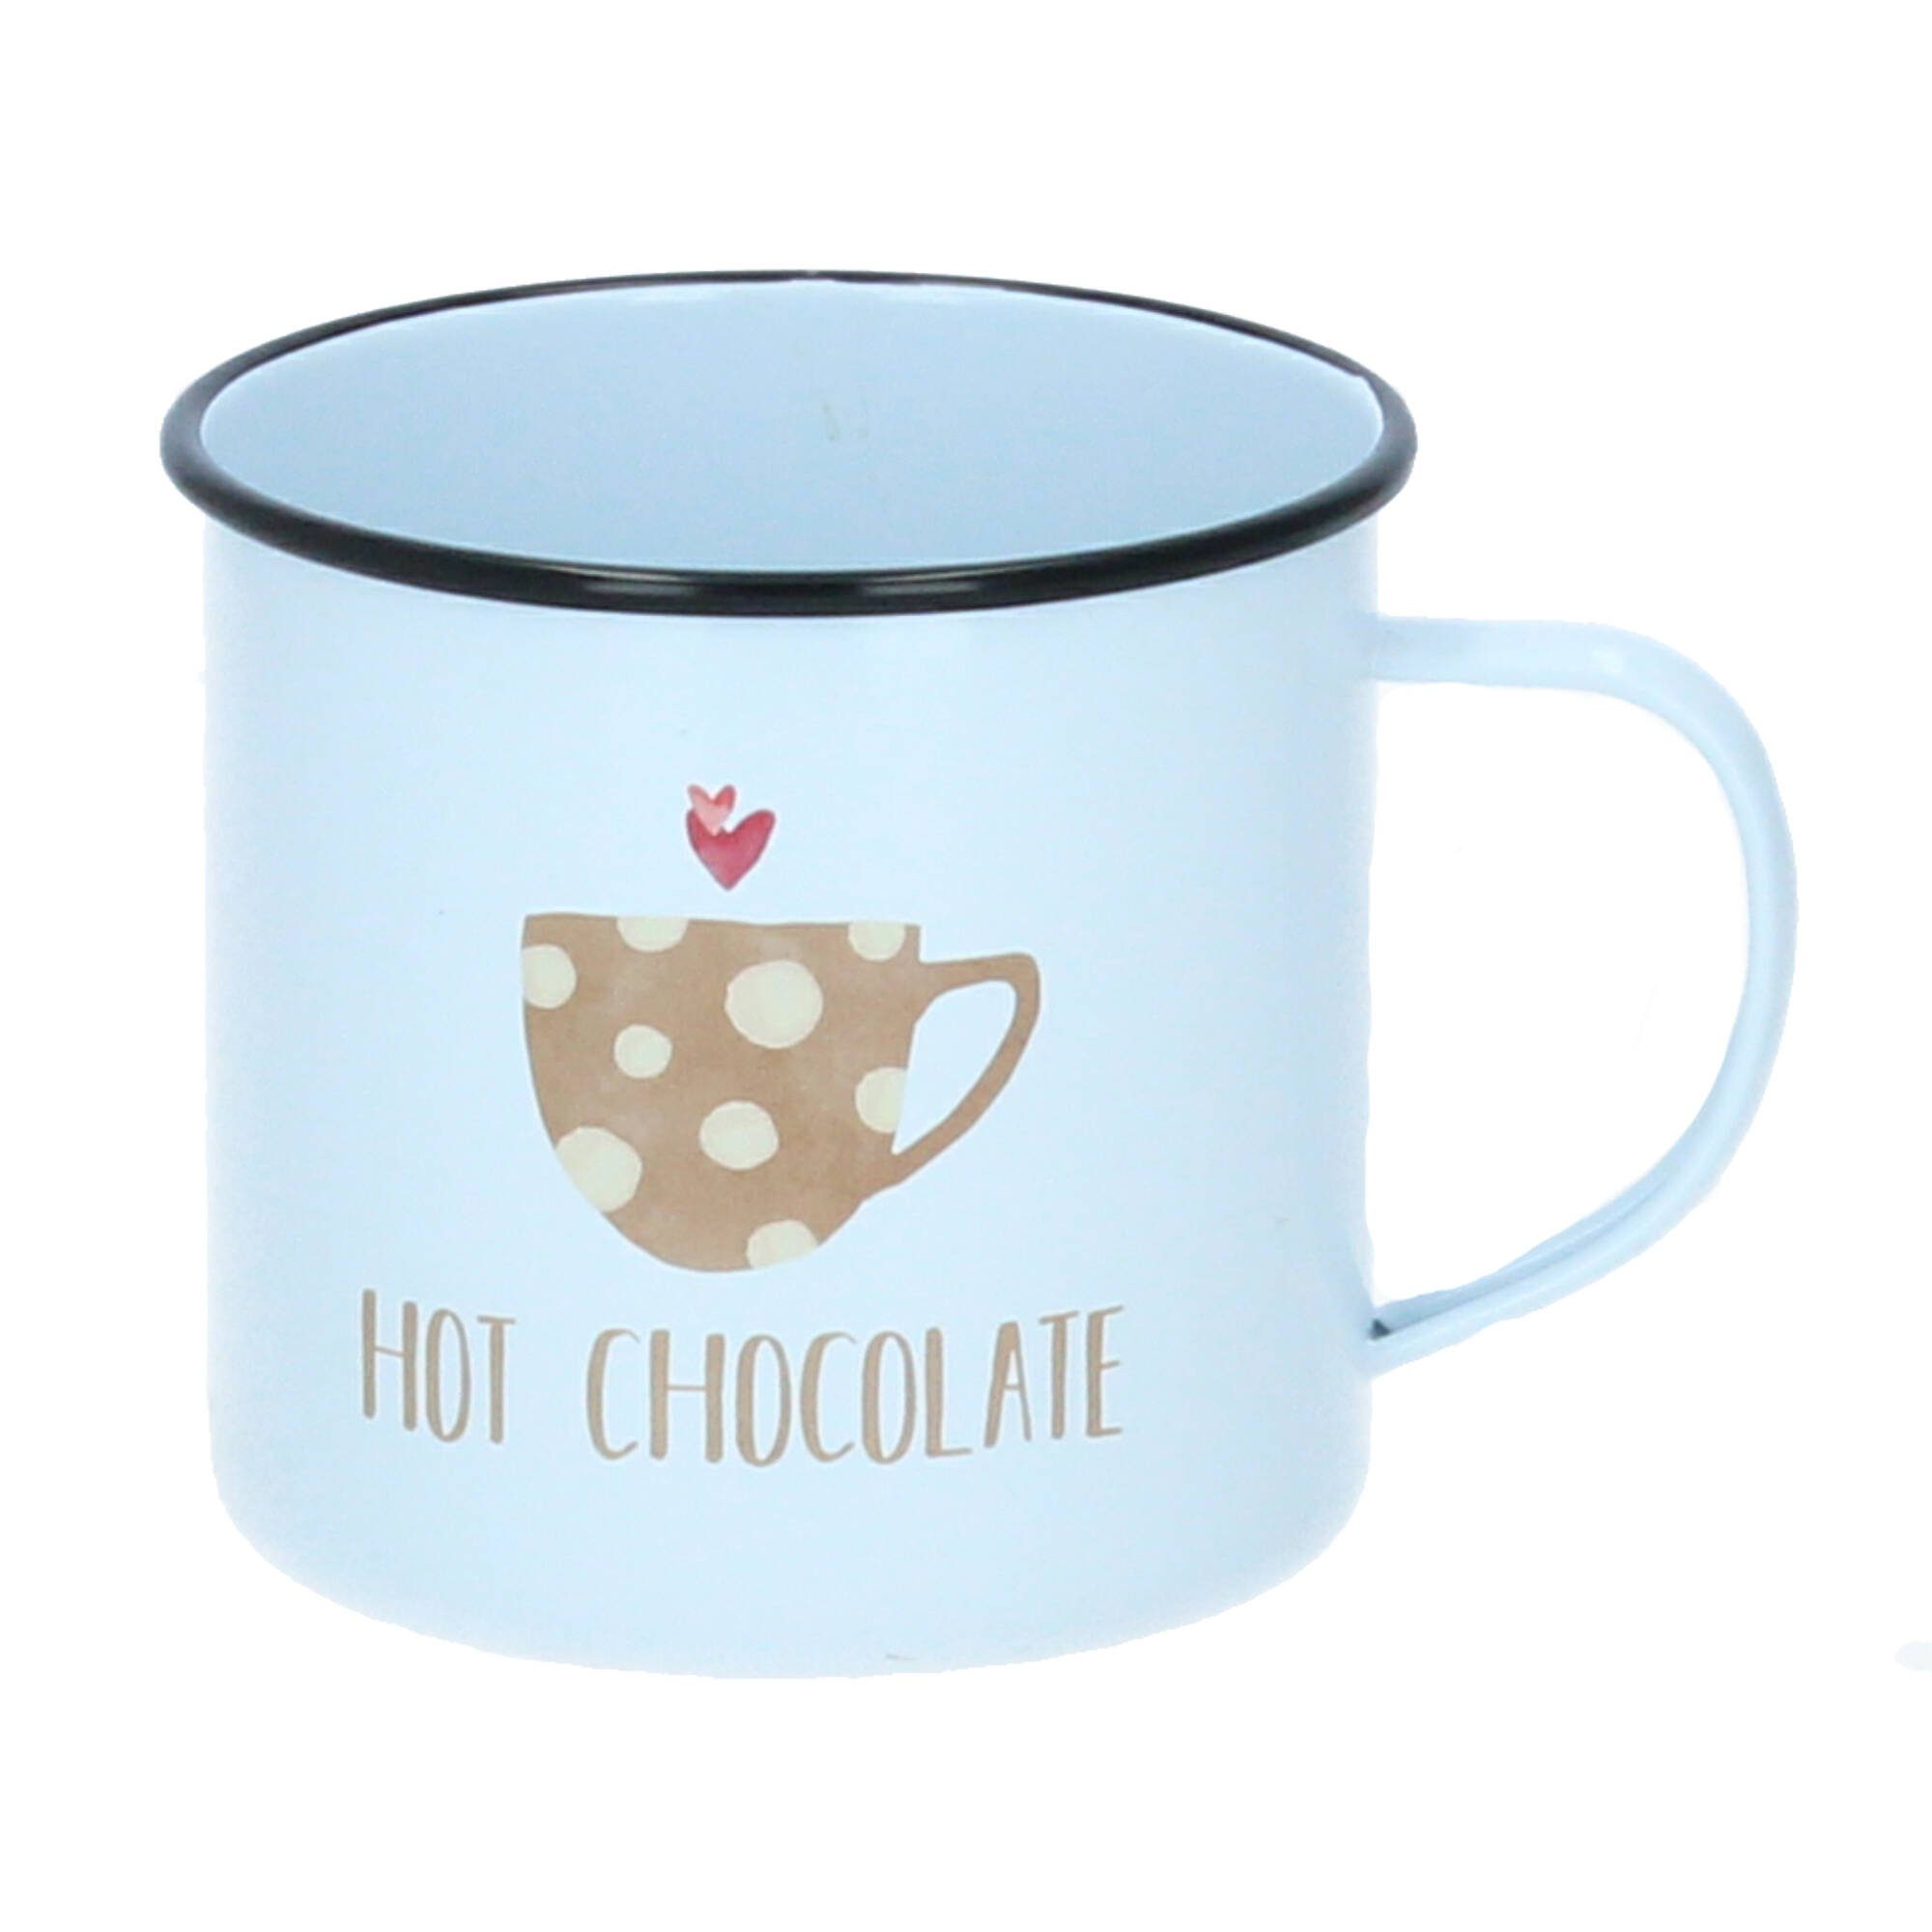 PPD Becher happy metal mug hot chocolate 400 ml weiß, Emaille